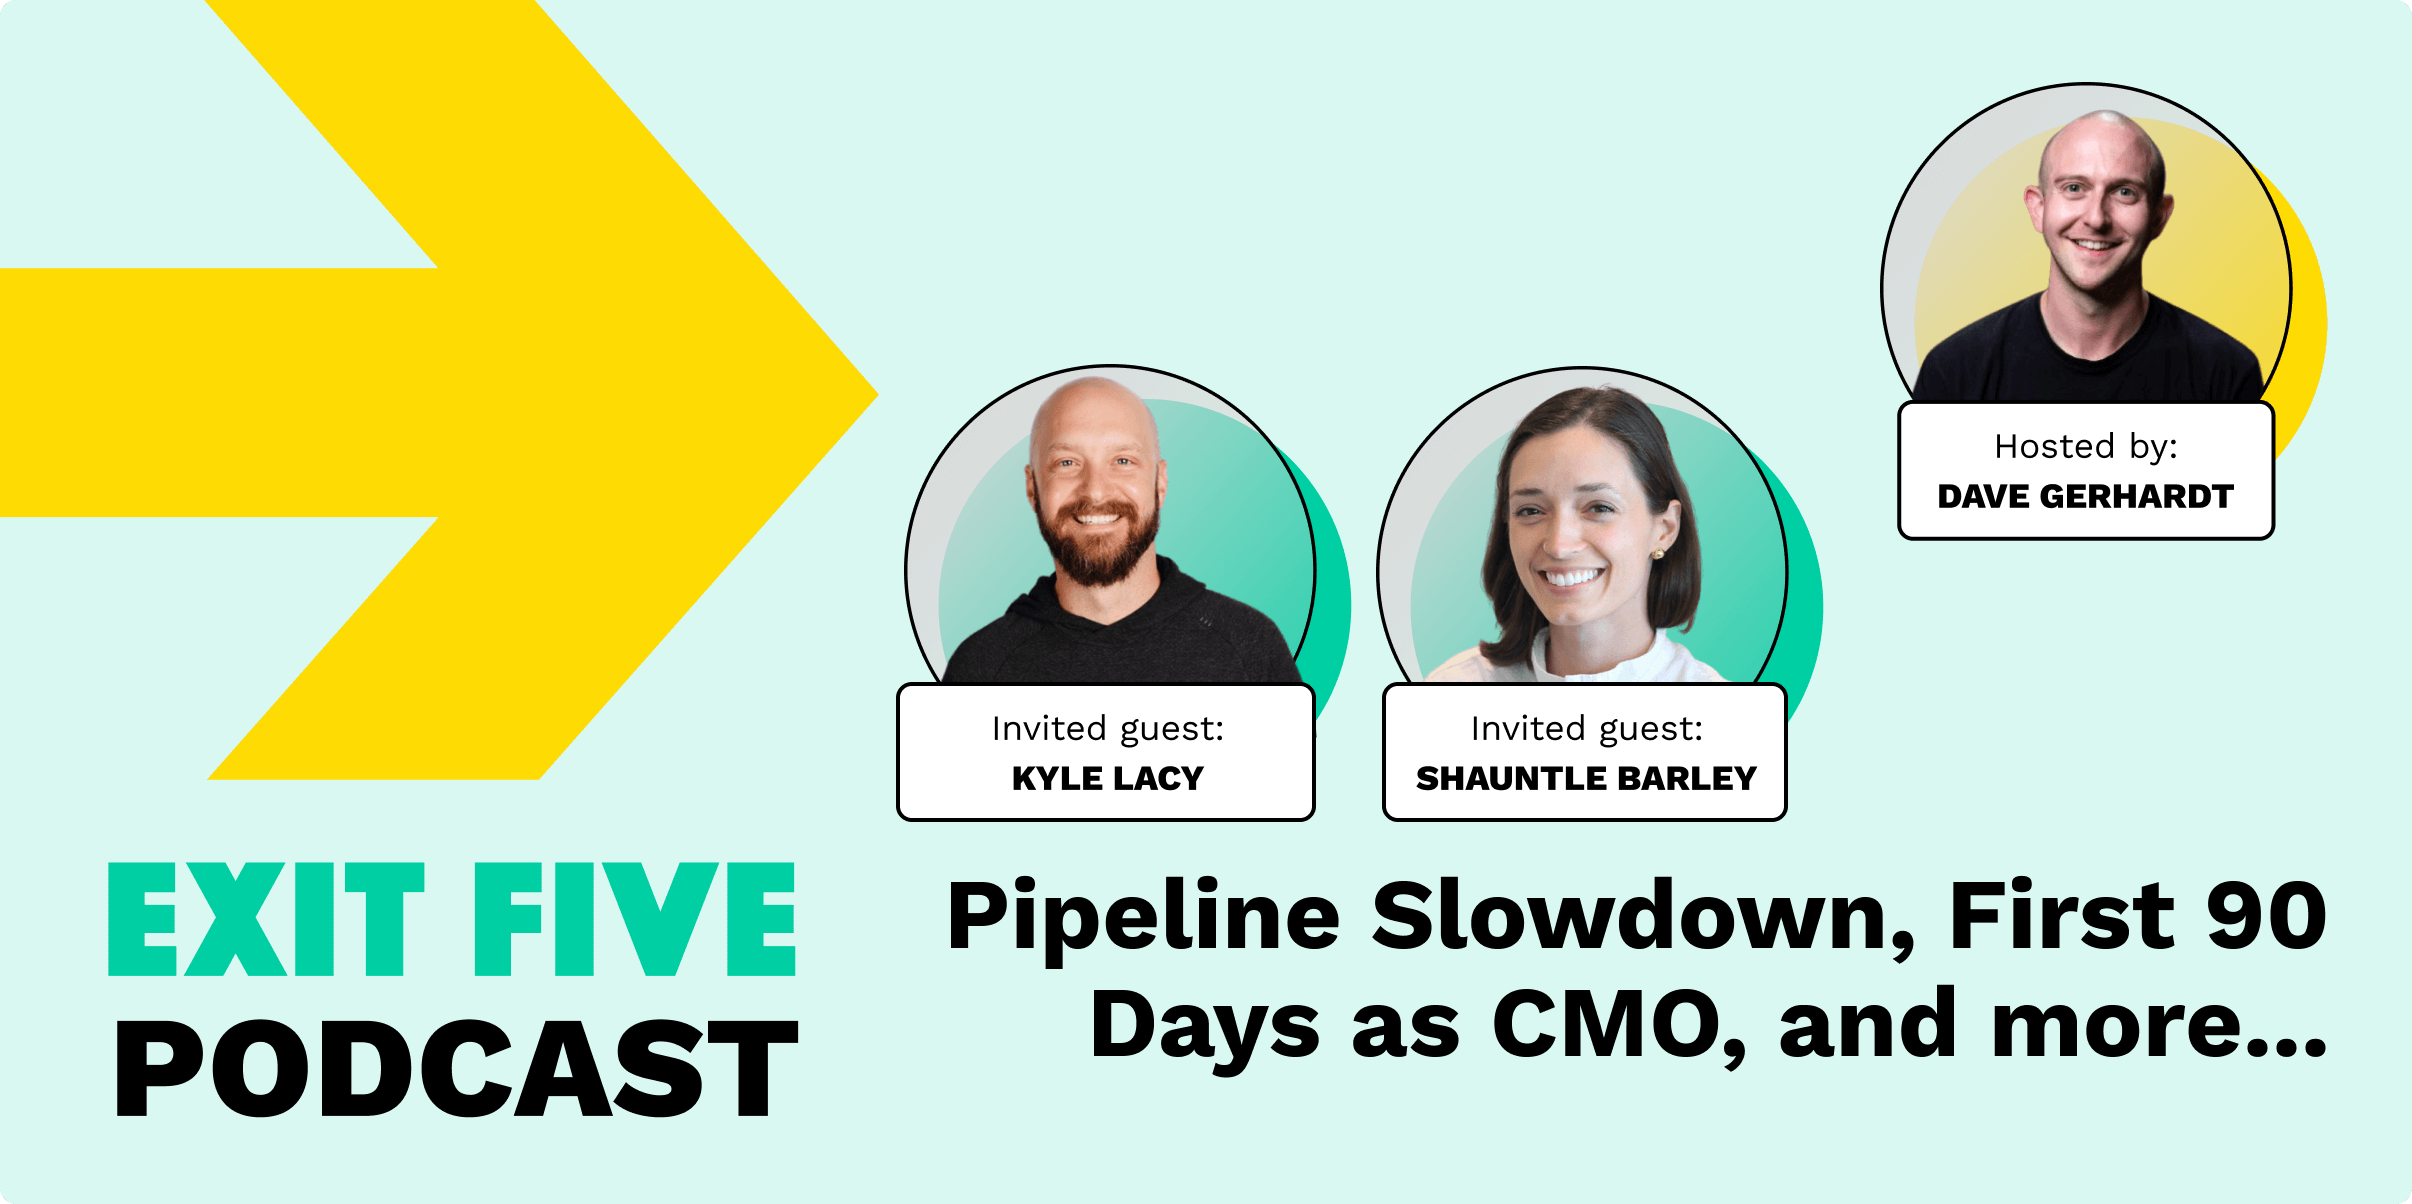 Pipeline Slowdown, First 90 Days as CMO, and more